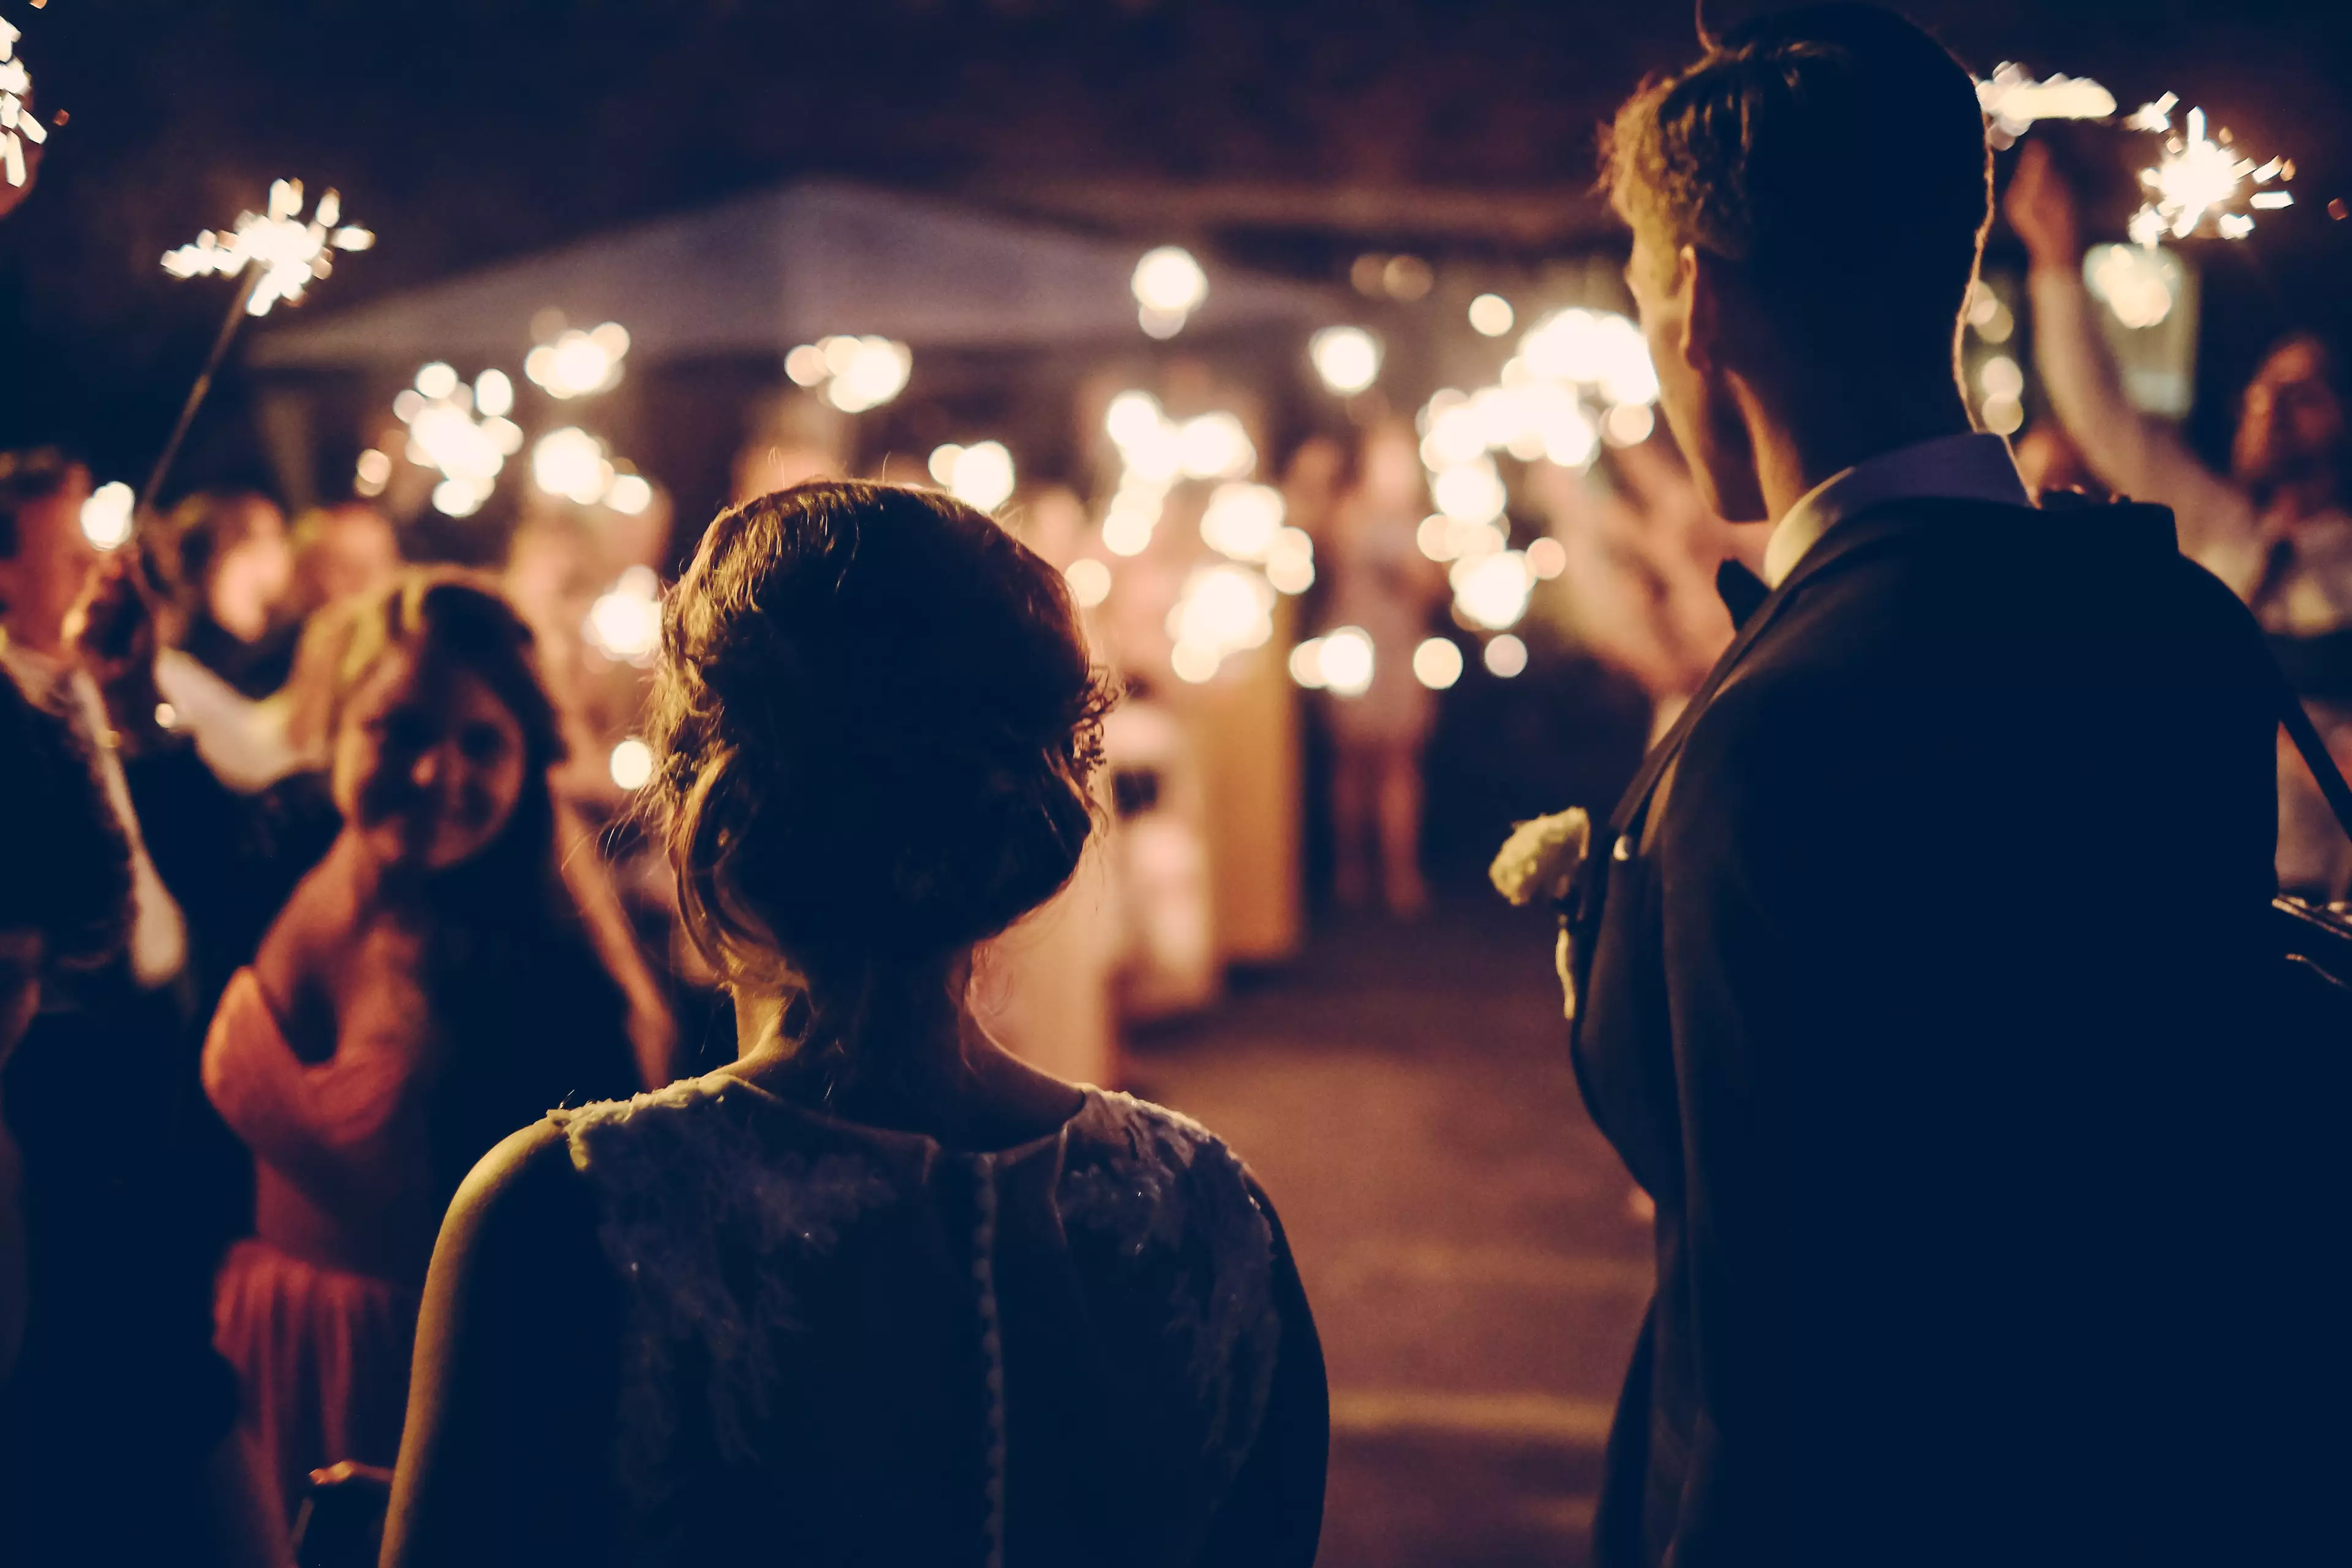 The bride explained how her mother-in-law brought her husband's ex as her plus one (